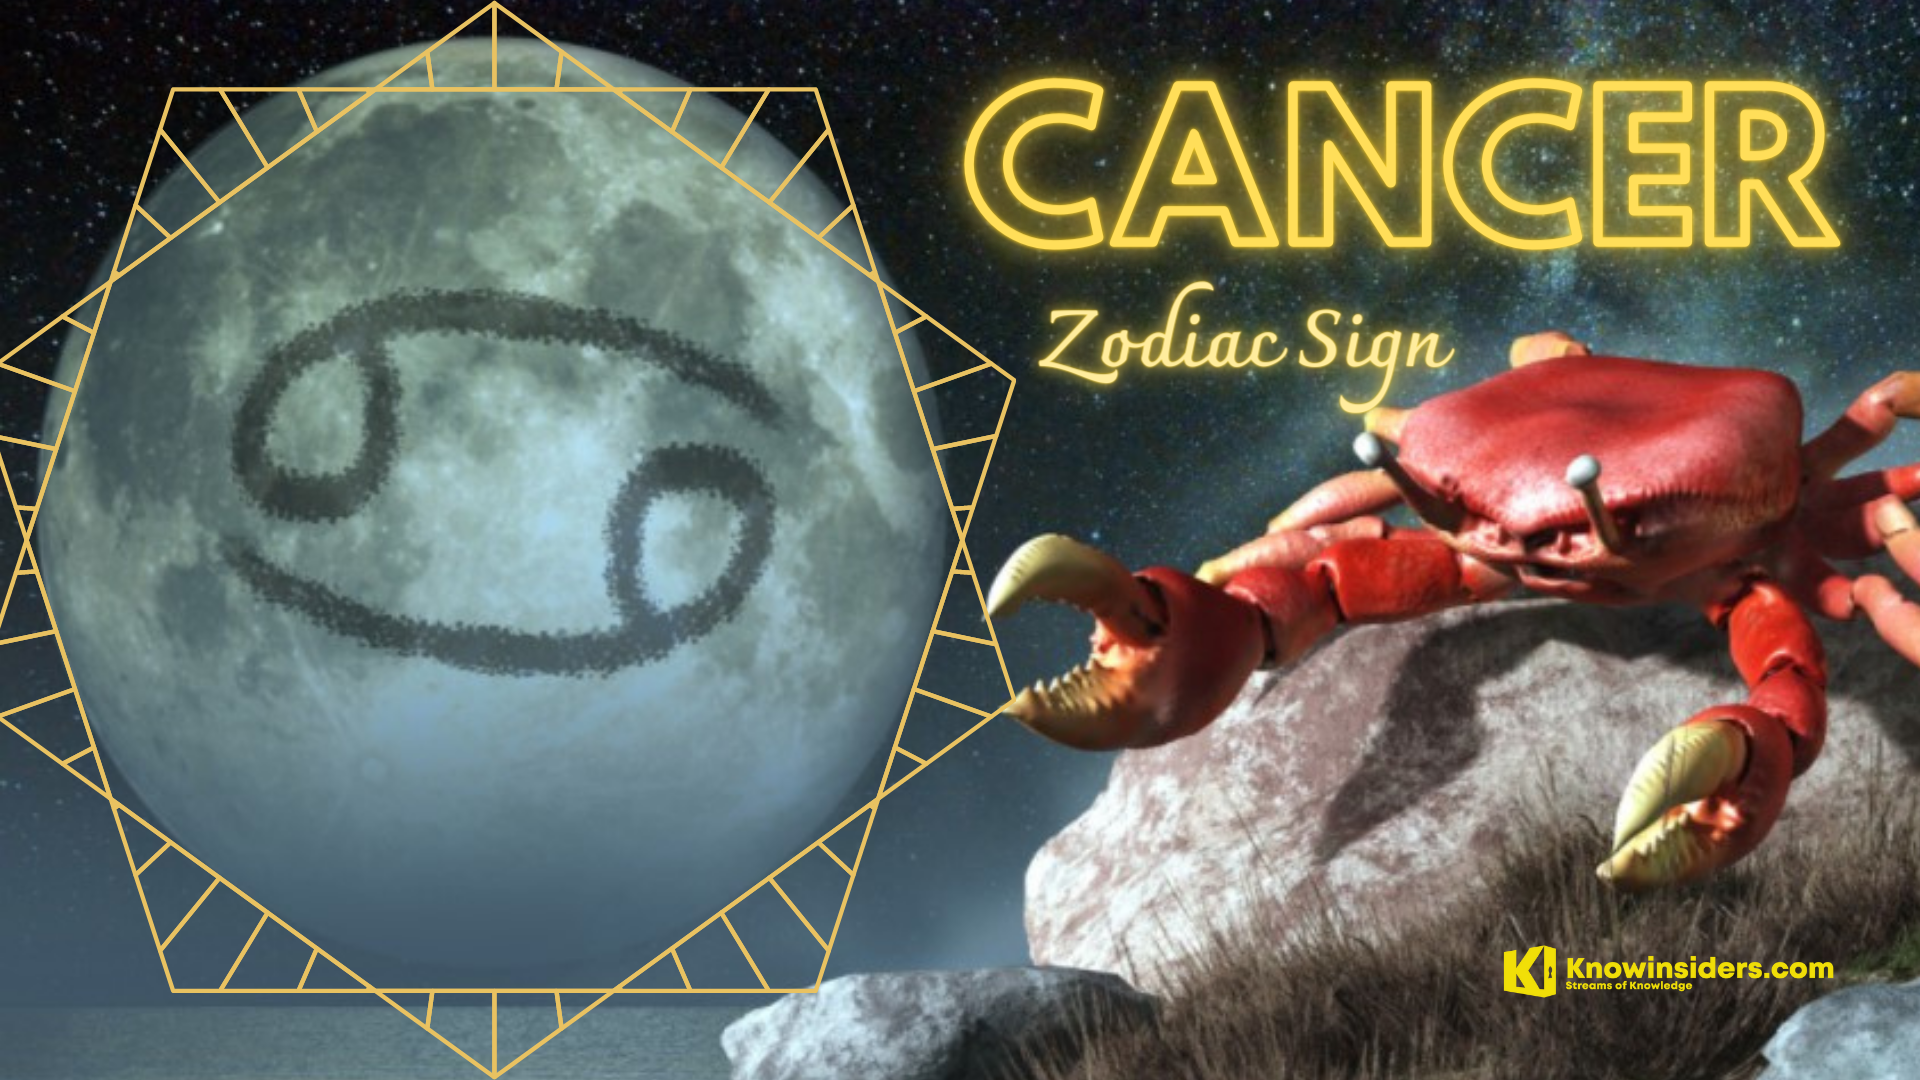 How To Find Out What Is My Zodiac Sign By Date Of Birth?